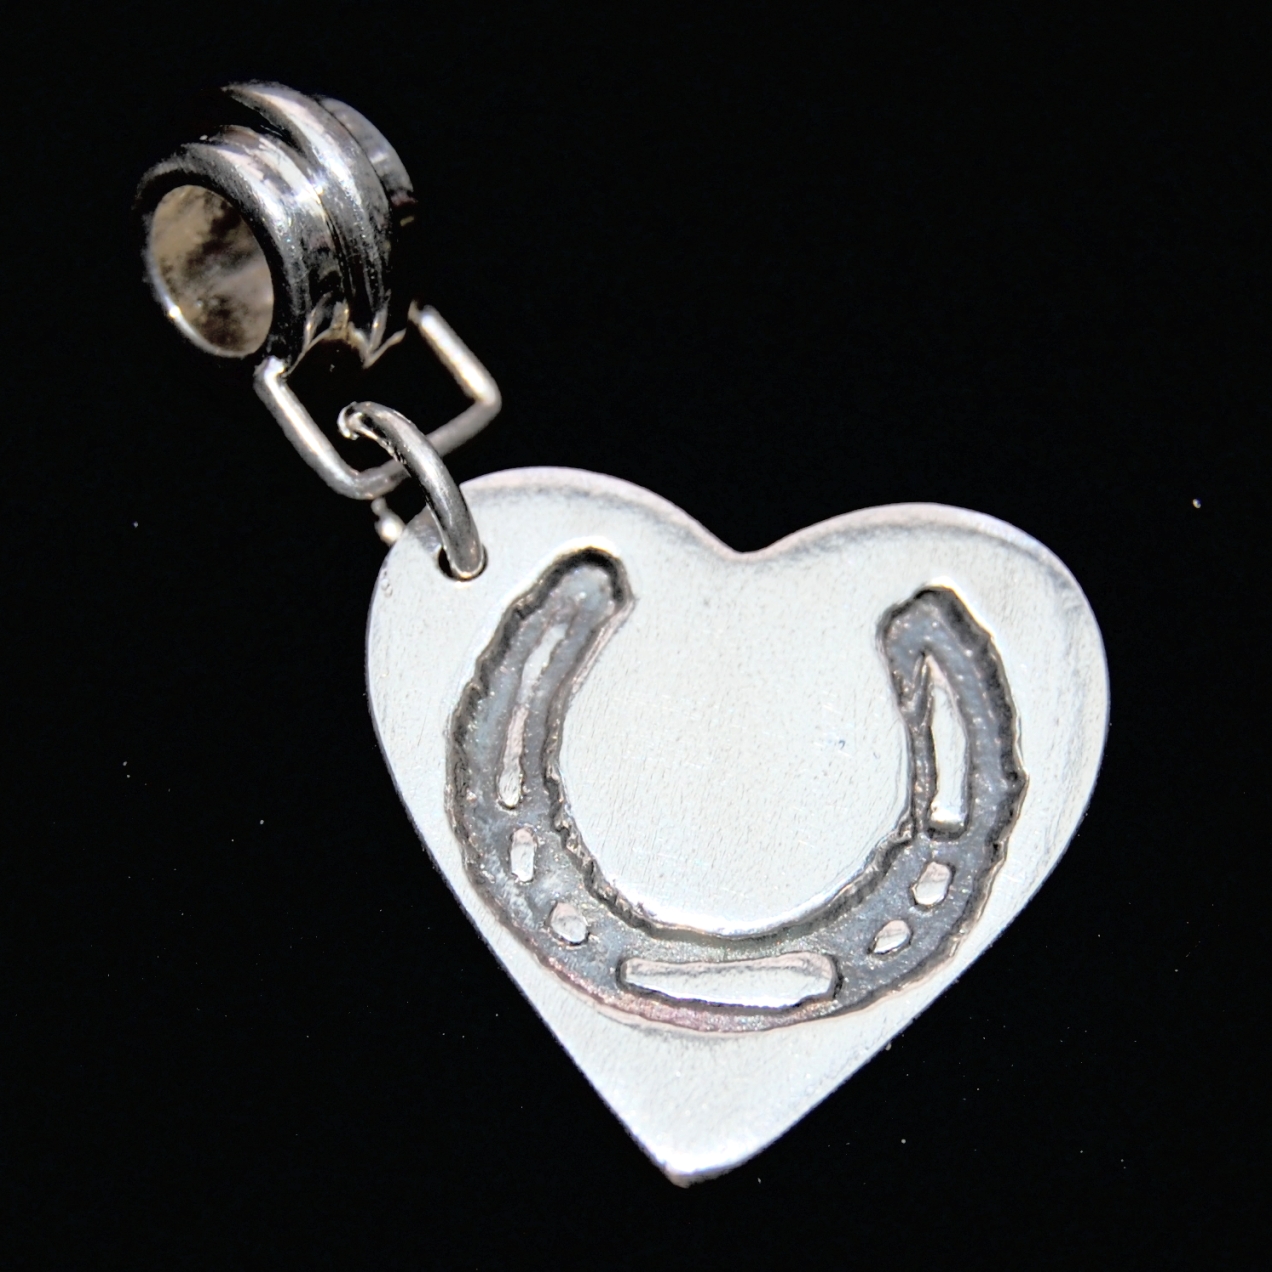 Regular silver heart horse shoe charm with charm carrier, ready to add to your bracelet.